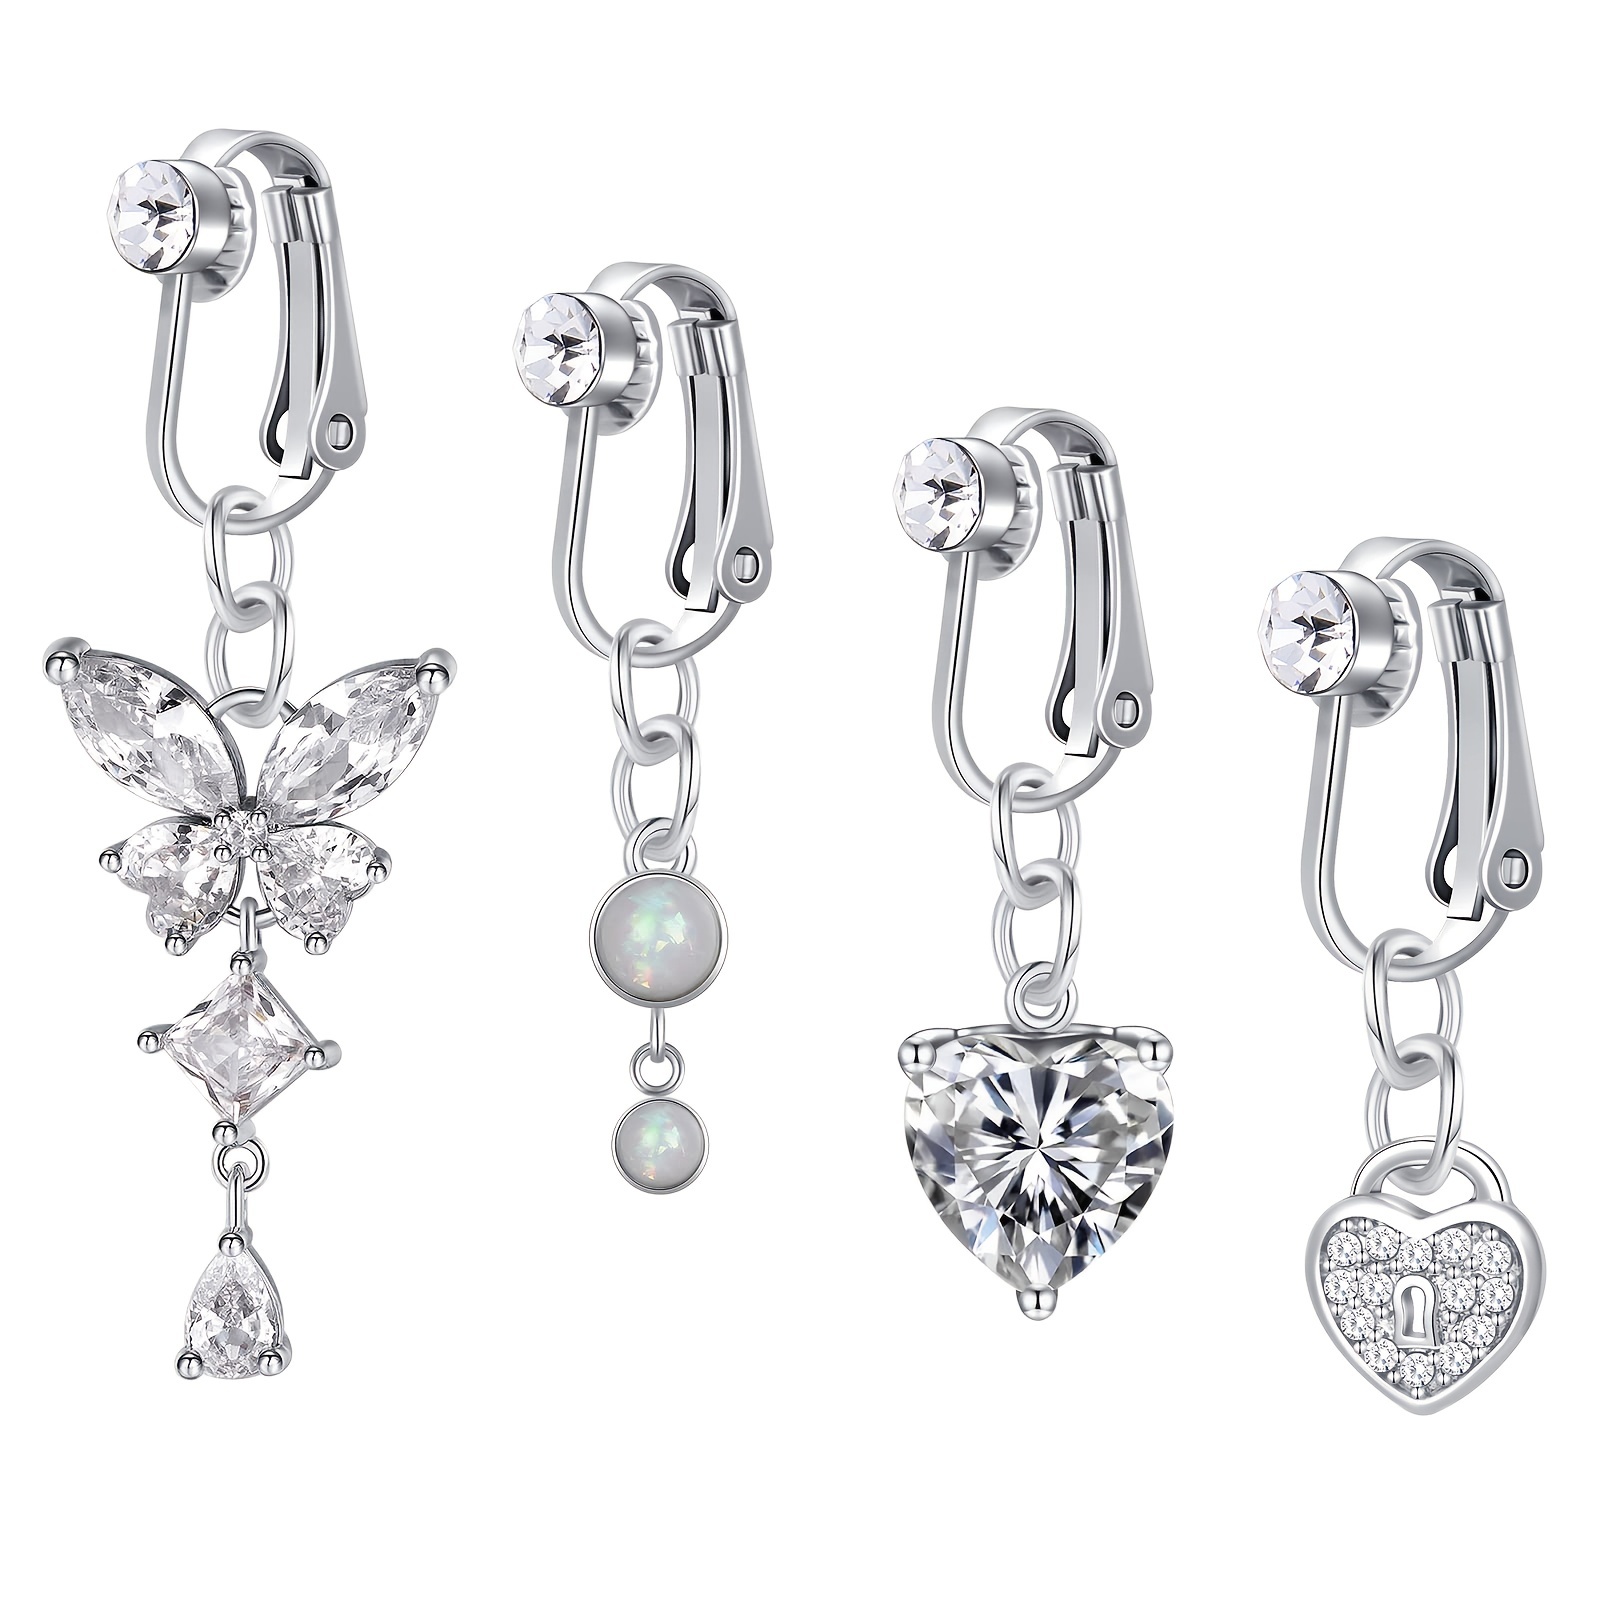 Fake Belly Ring Heart Shape Belly Ring Rhinestone Belly 